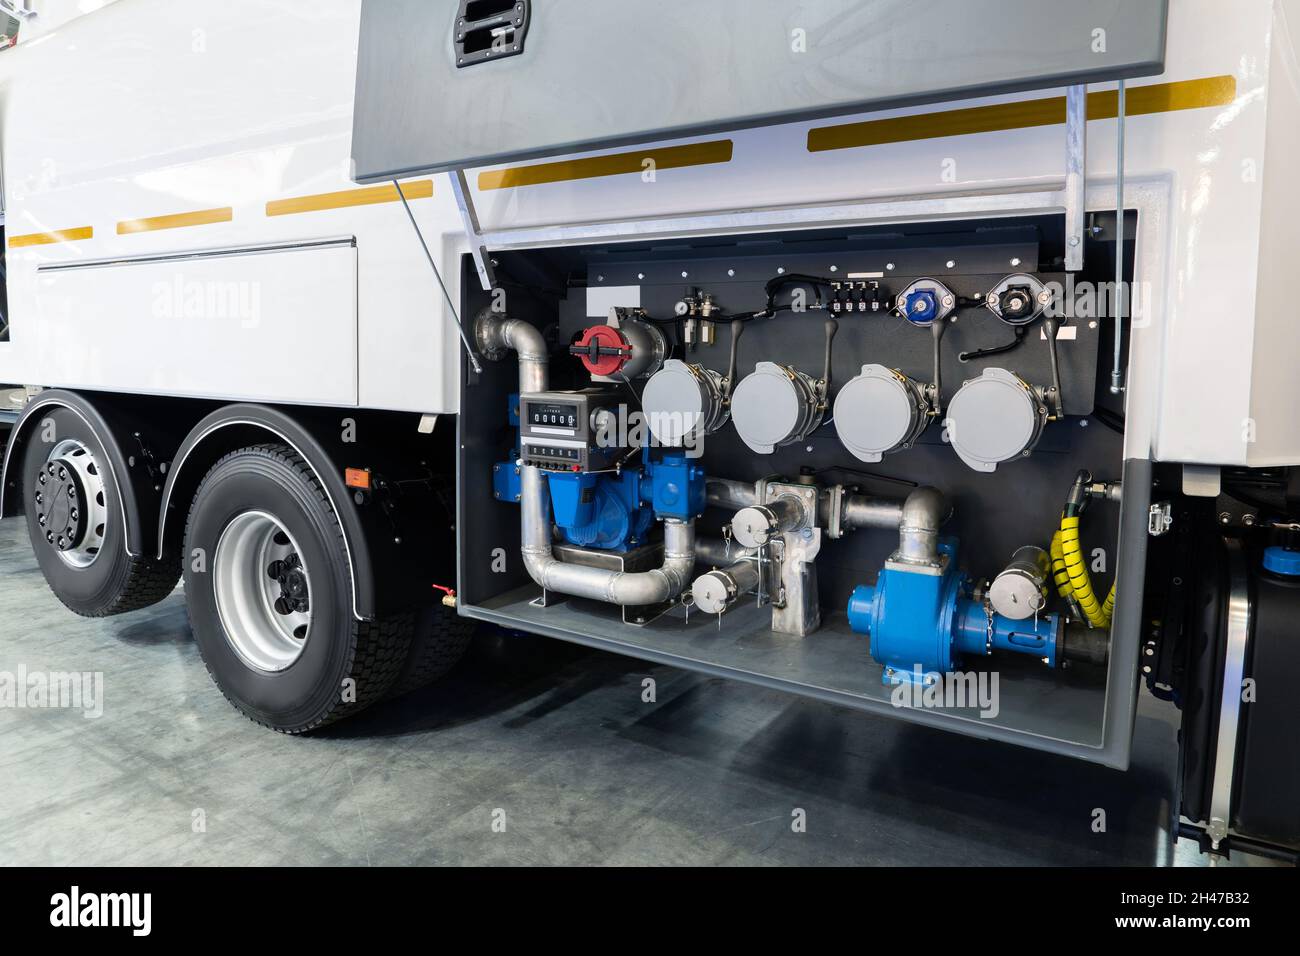 Equipment for pumping fuel on a fuel tanker truck Stock Photo